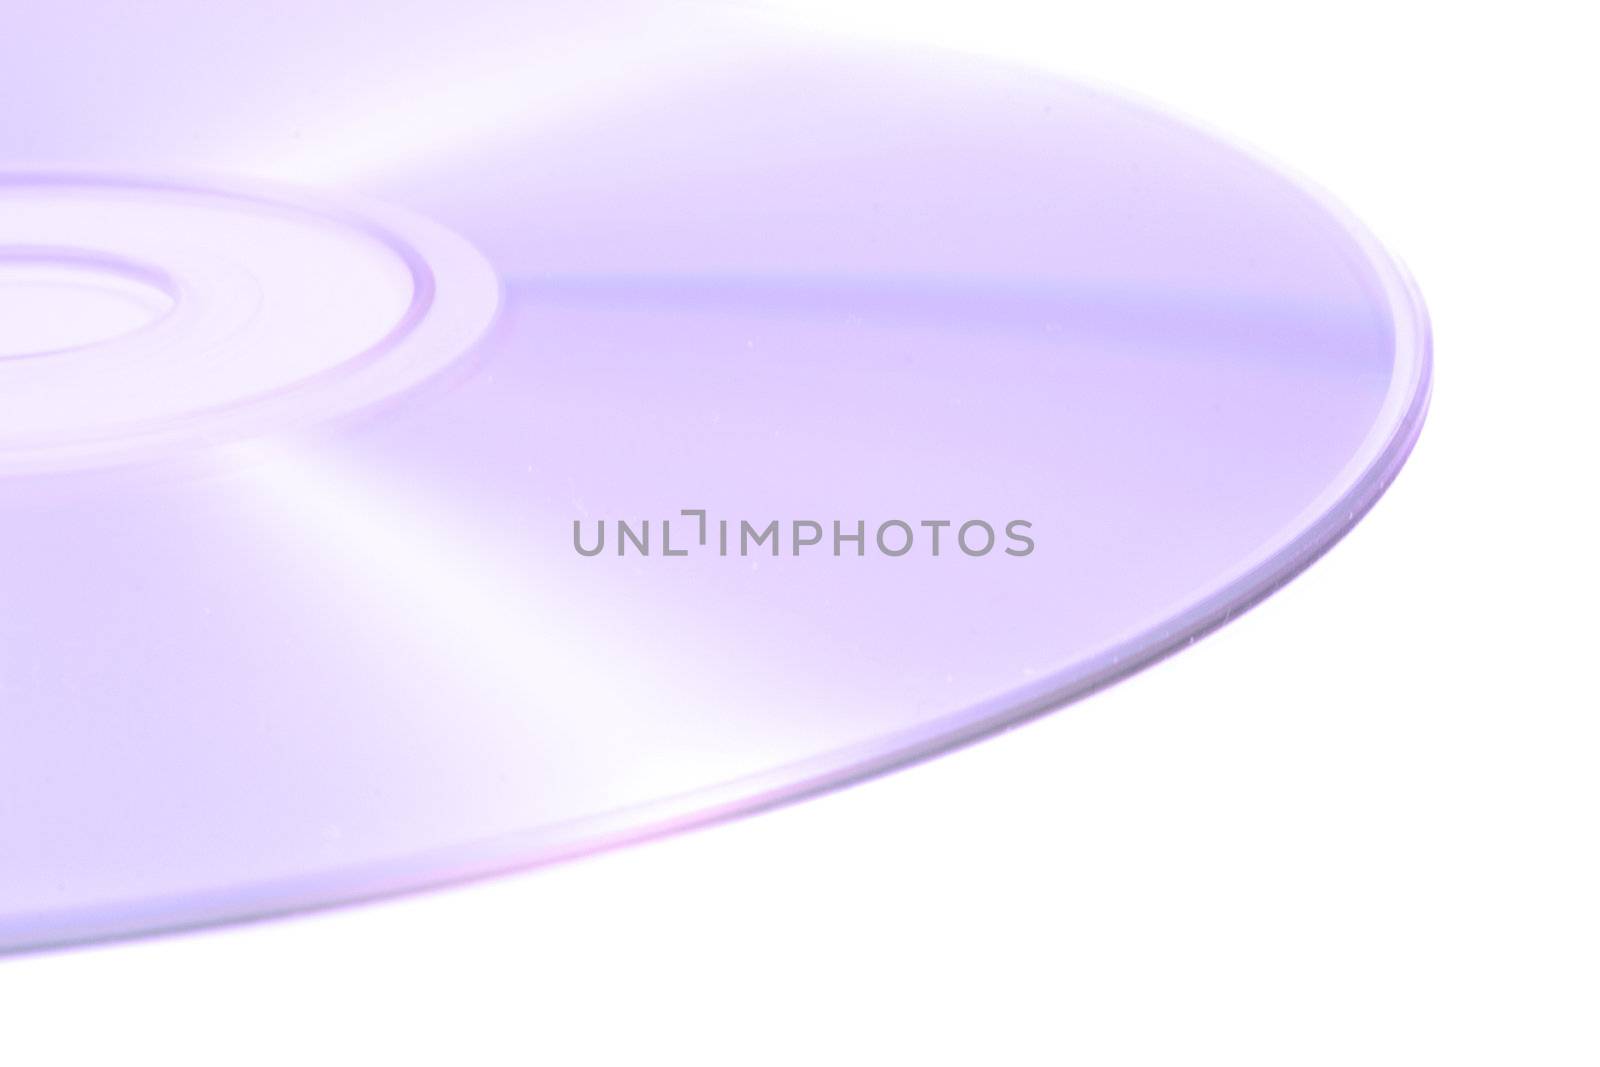 A closeup view of a light shiny compact disk used for data storage on a white background.